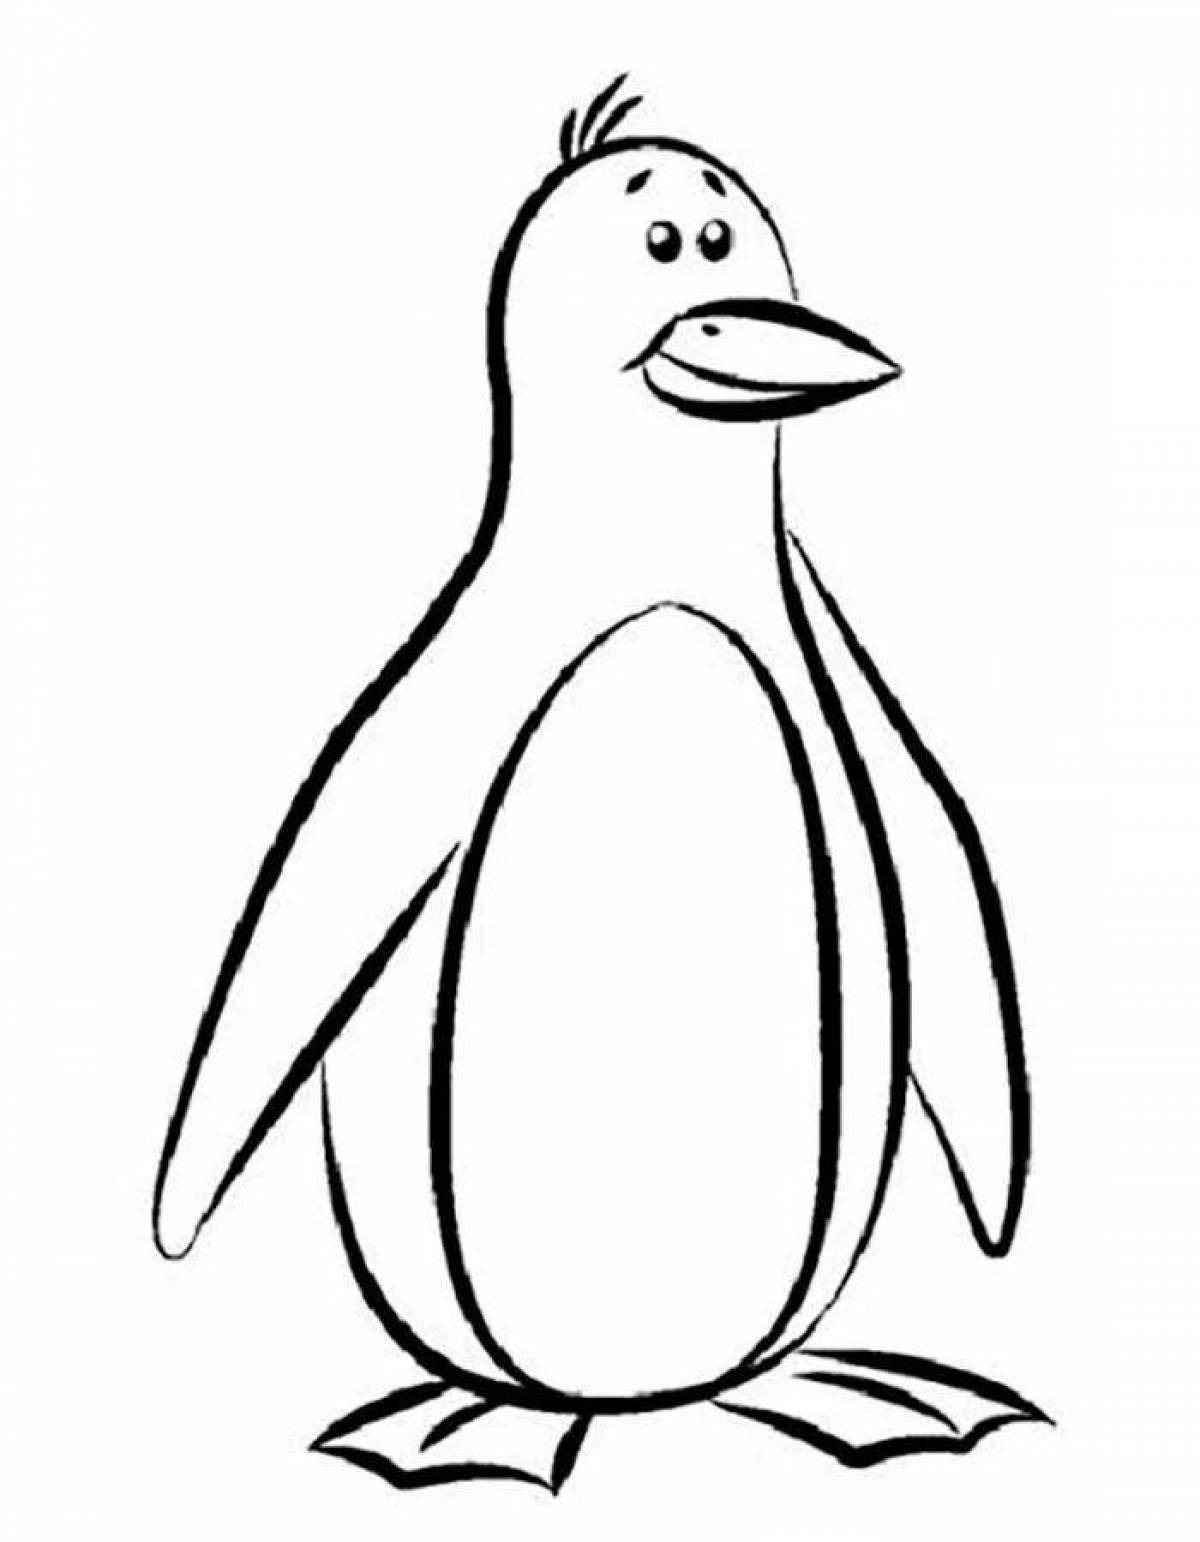 Colorful penguin coloring page for kids